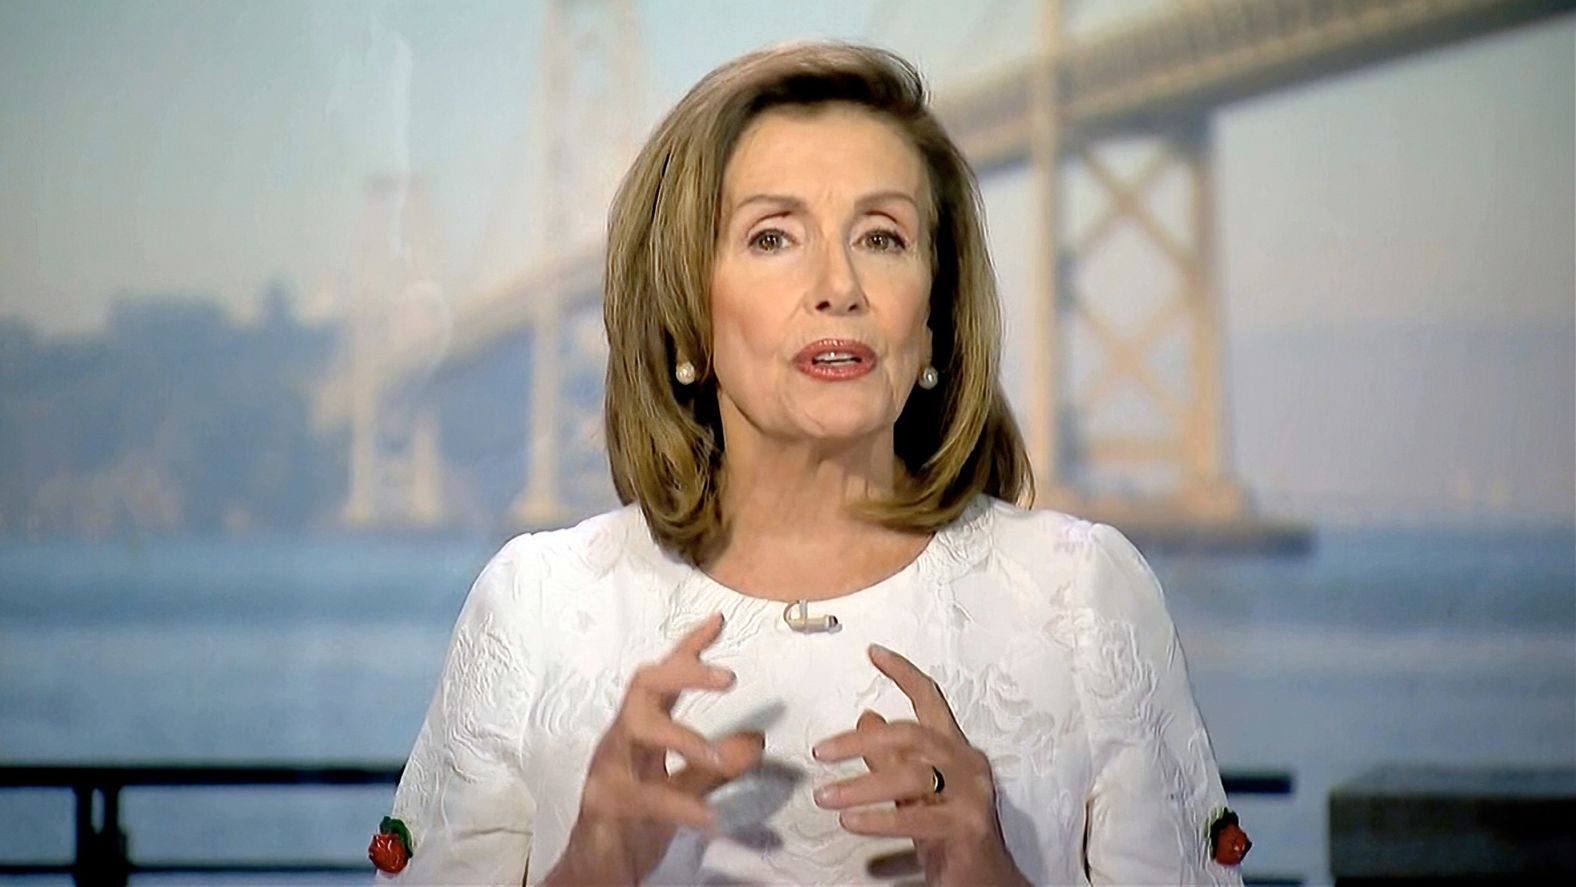 House Speaker Nancy Pelosi delivers remarks on Wednesday. "As speaker, I've seen firsthand Donald Trump's disrespect for facts, for working families, and for women in particular — disrespect written into his policies toward our health and our rights, not just his conduct," she said.